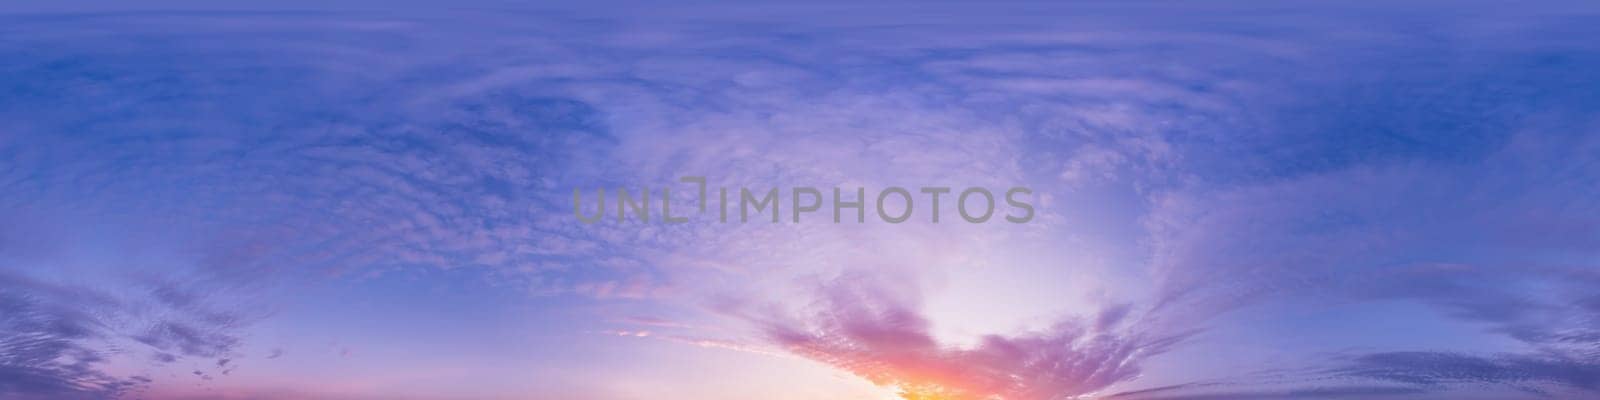 Sunset sky panorama with dramatic bright glowing pink Cirrus clouds. HDR 360 seamless spherical panorama. Full zenith or sky dome for 3D visualization, sky replacement for aerial drone panoramas. by Matiunina